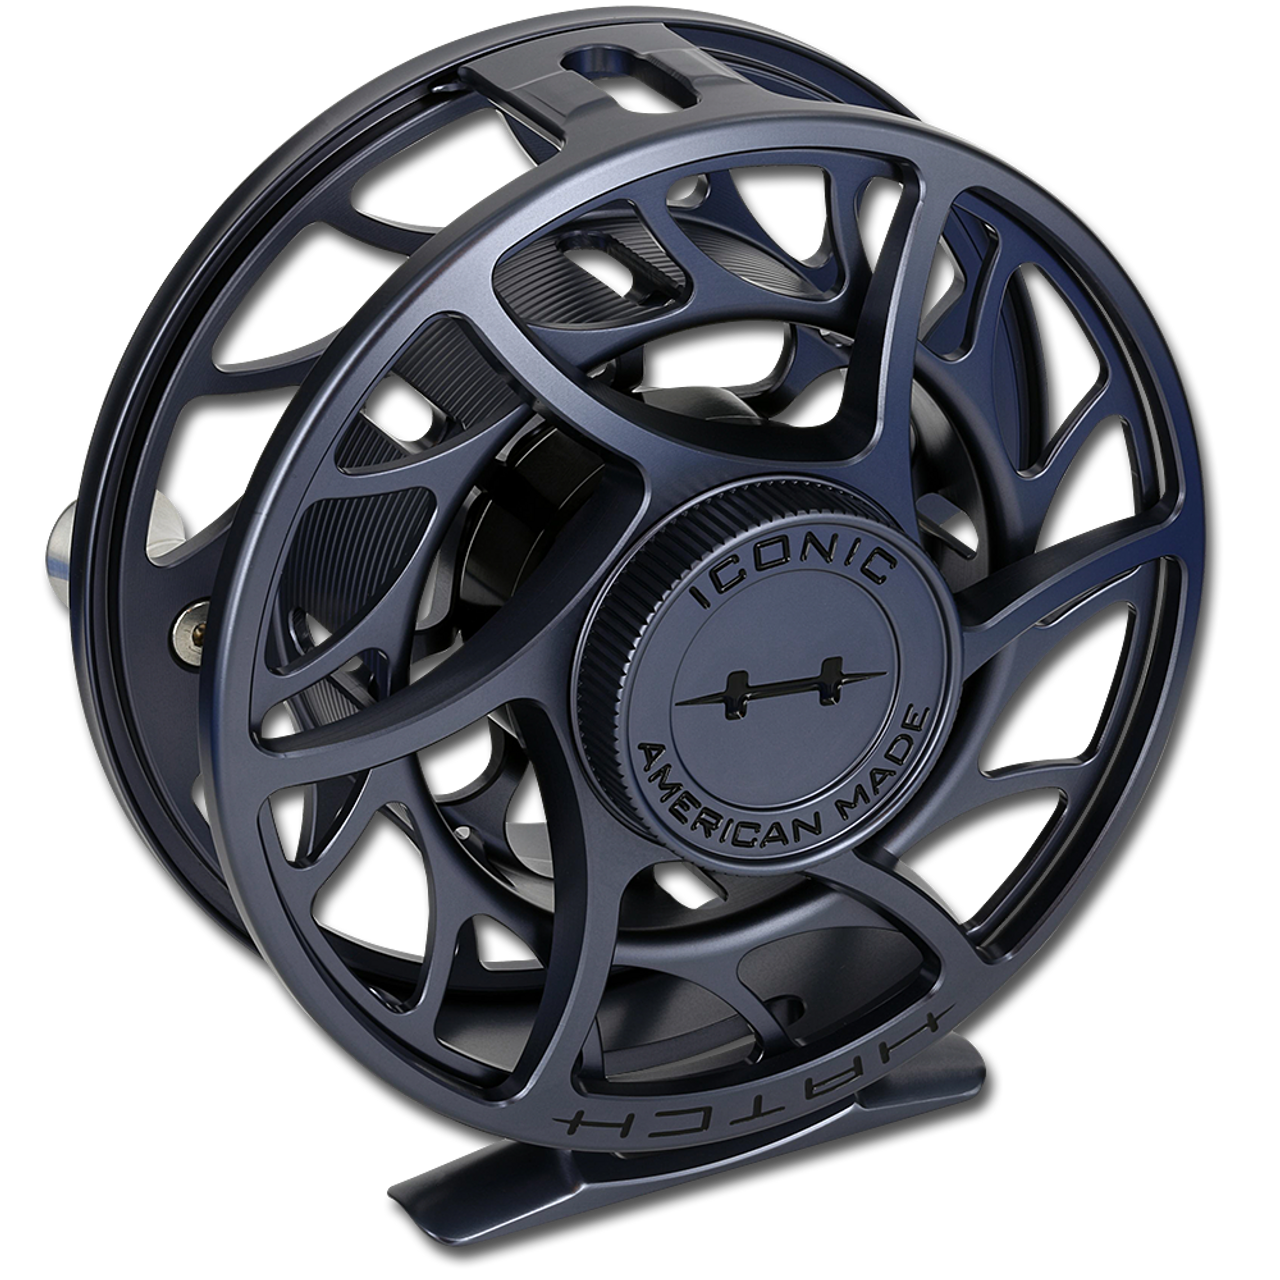 Hatch Iconic Fly Reel Freshwater | Freshwater Fly Reels | Urban Angler